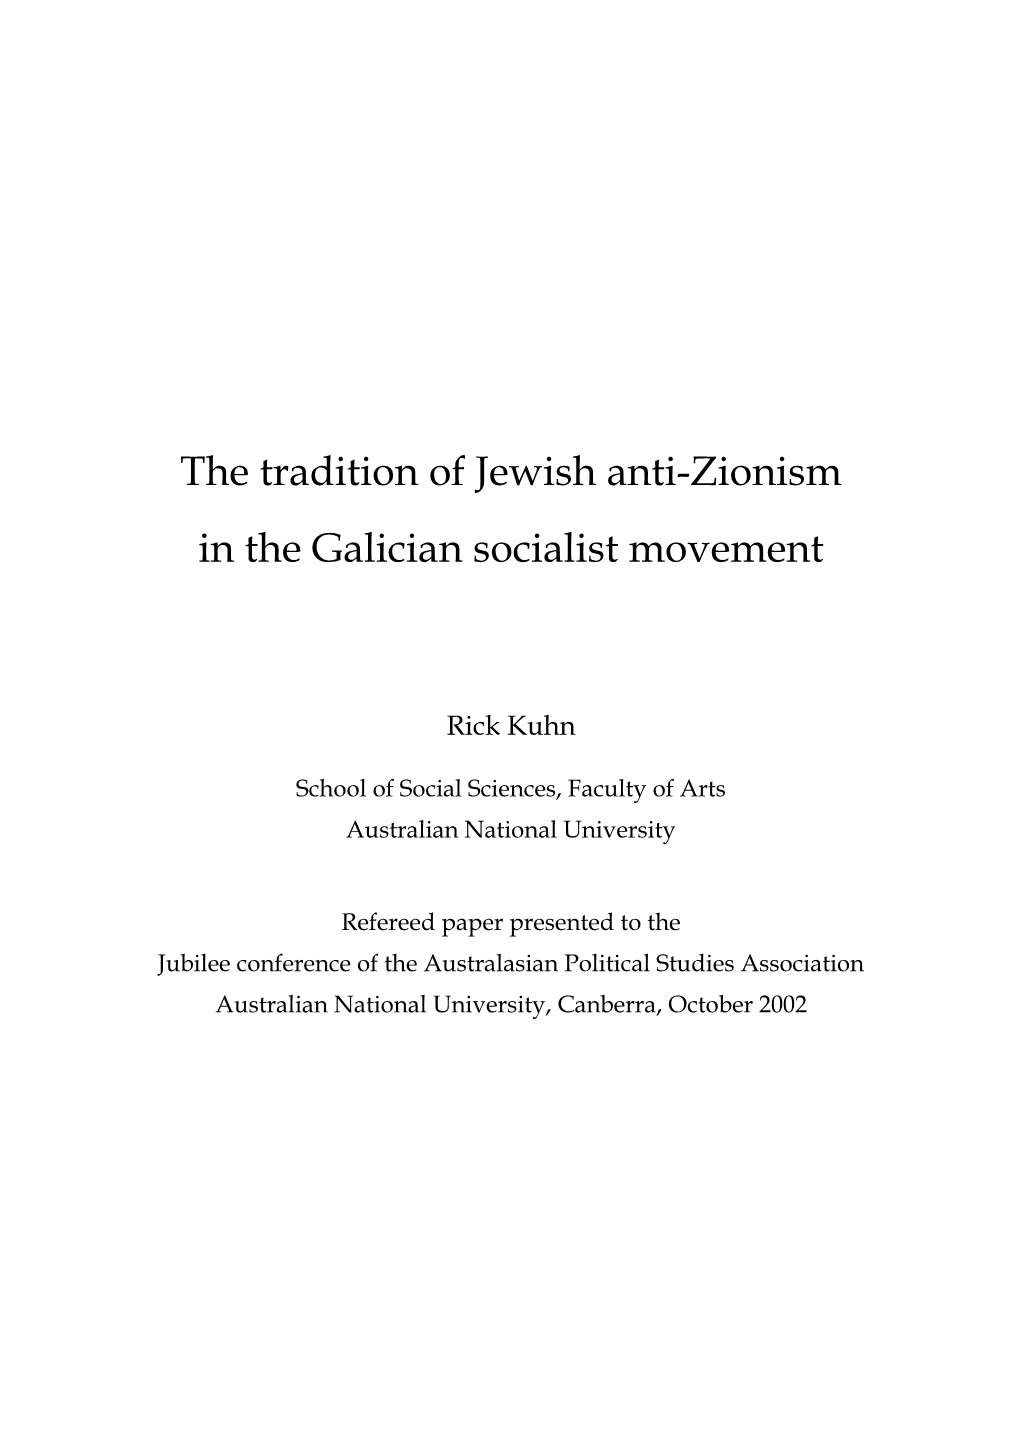 The Tradition of Jewish Anti-Zionism in the Galician Socialist Movement